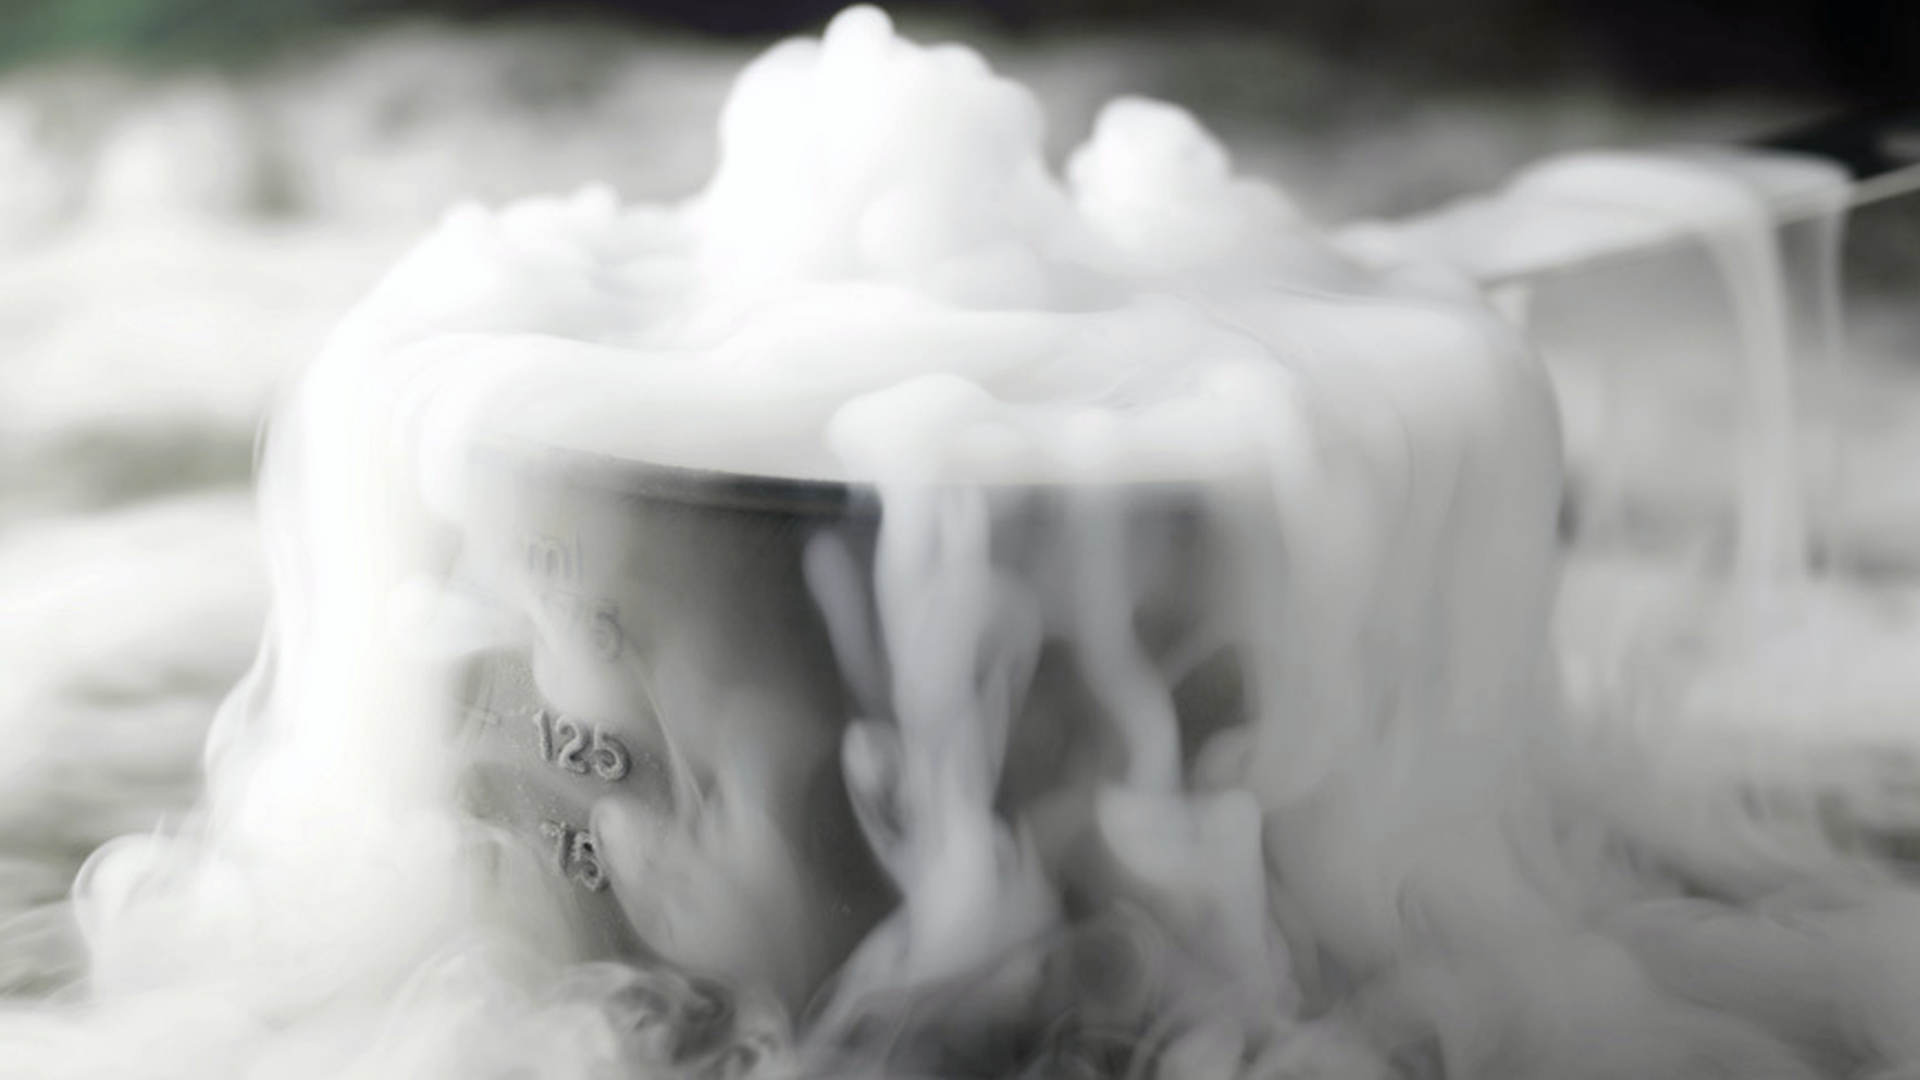 Ice products - Dry Ice inside a metal container creating a white fog effect